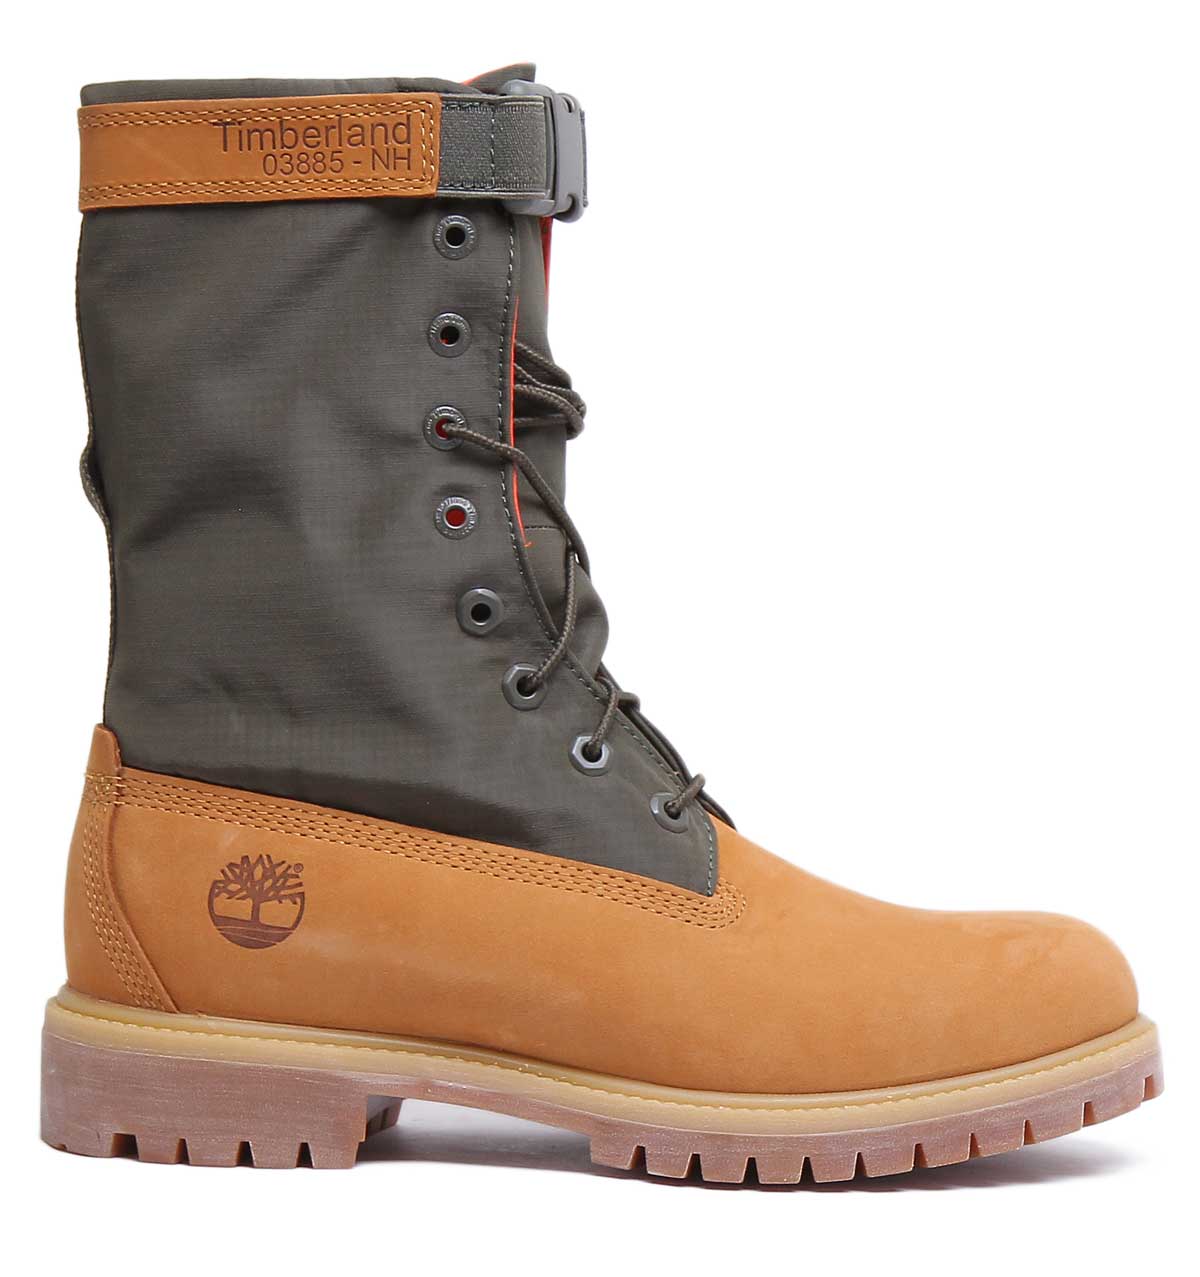 Timberland A1QY8 6 Inch Premium Lace Up 